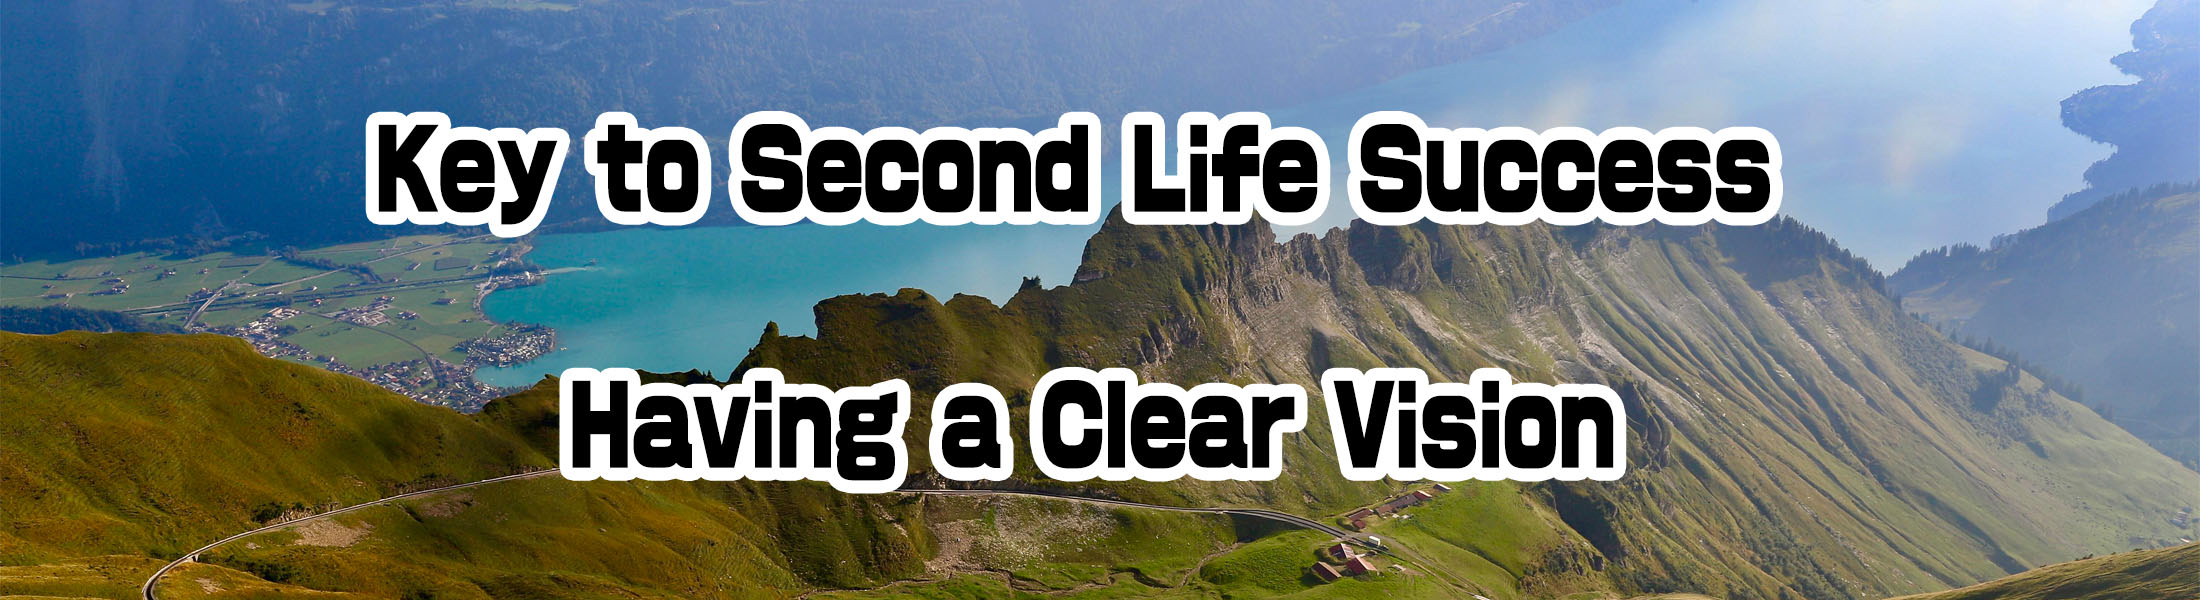 Take Stock of Your Life for a Second Life